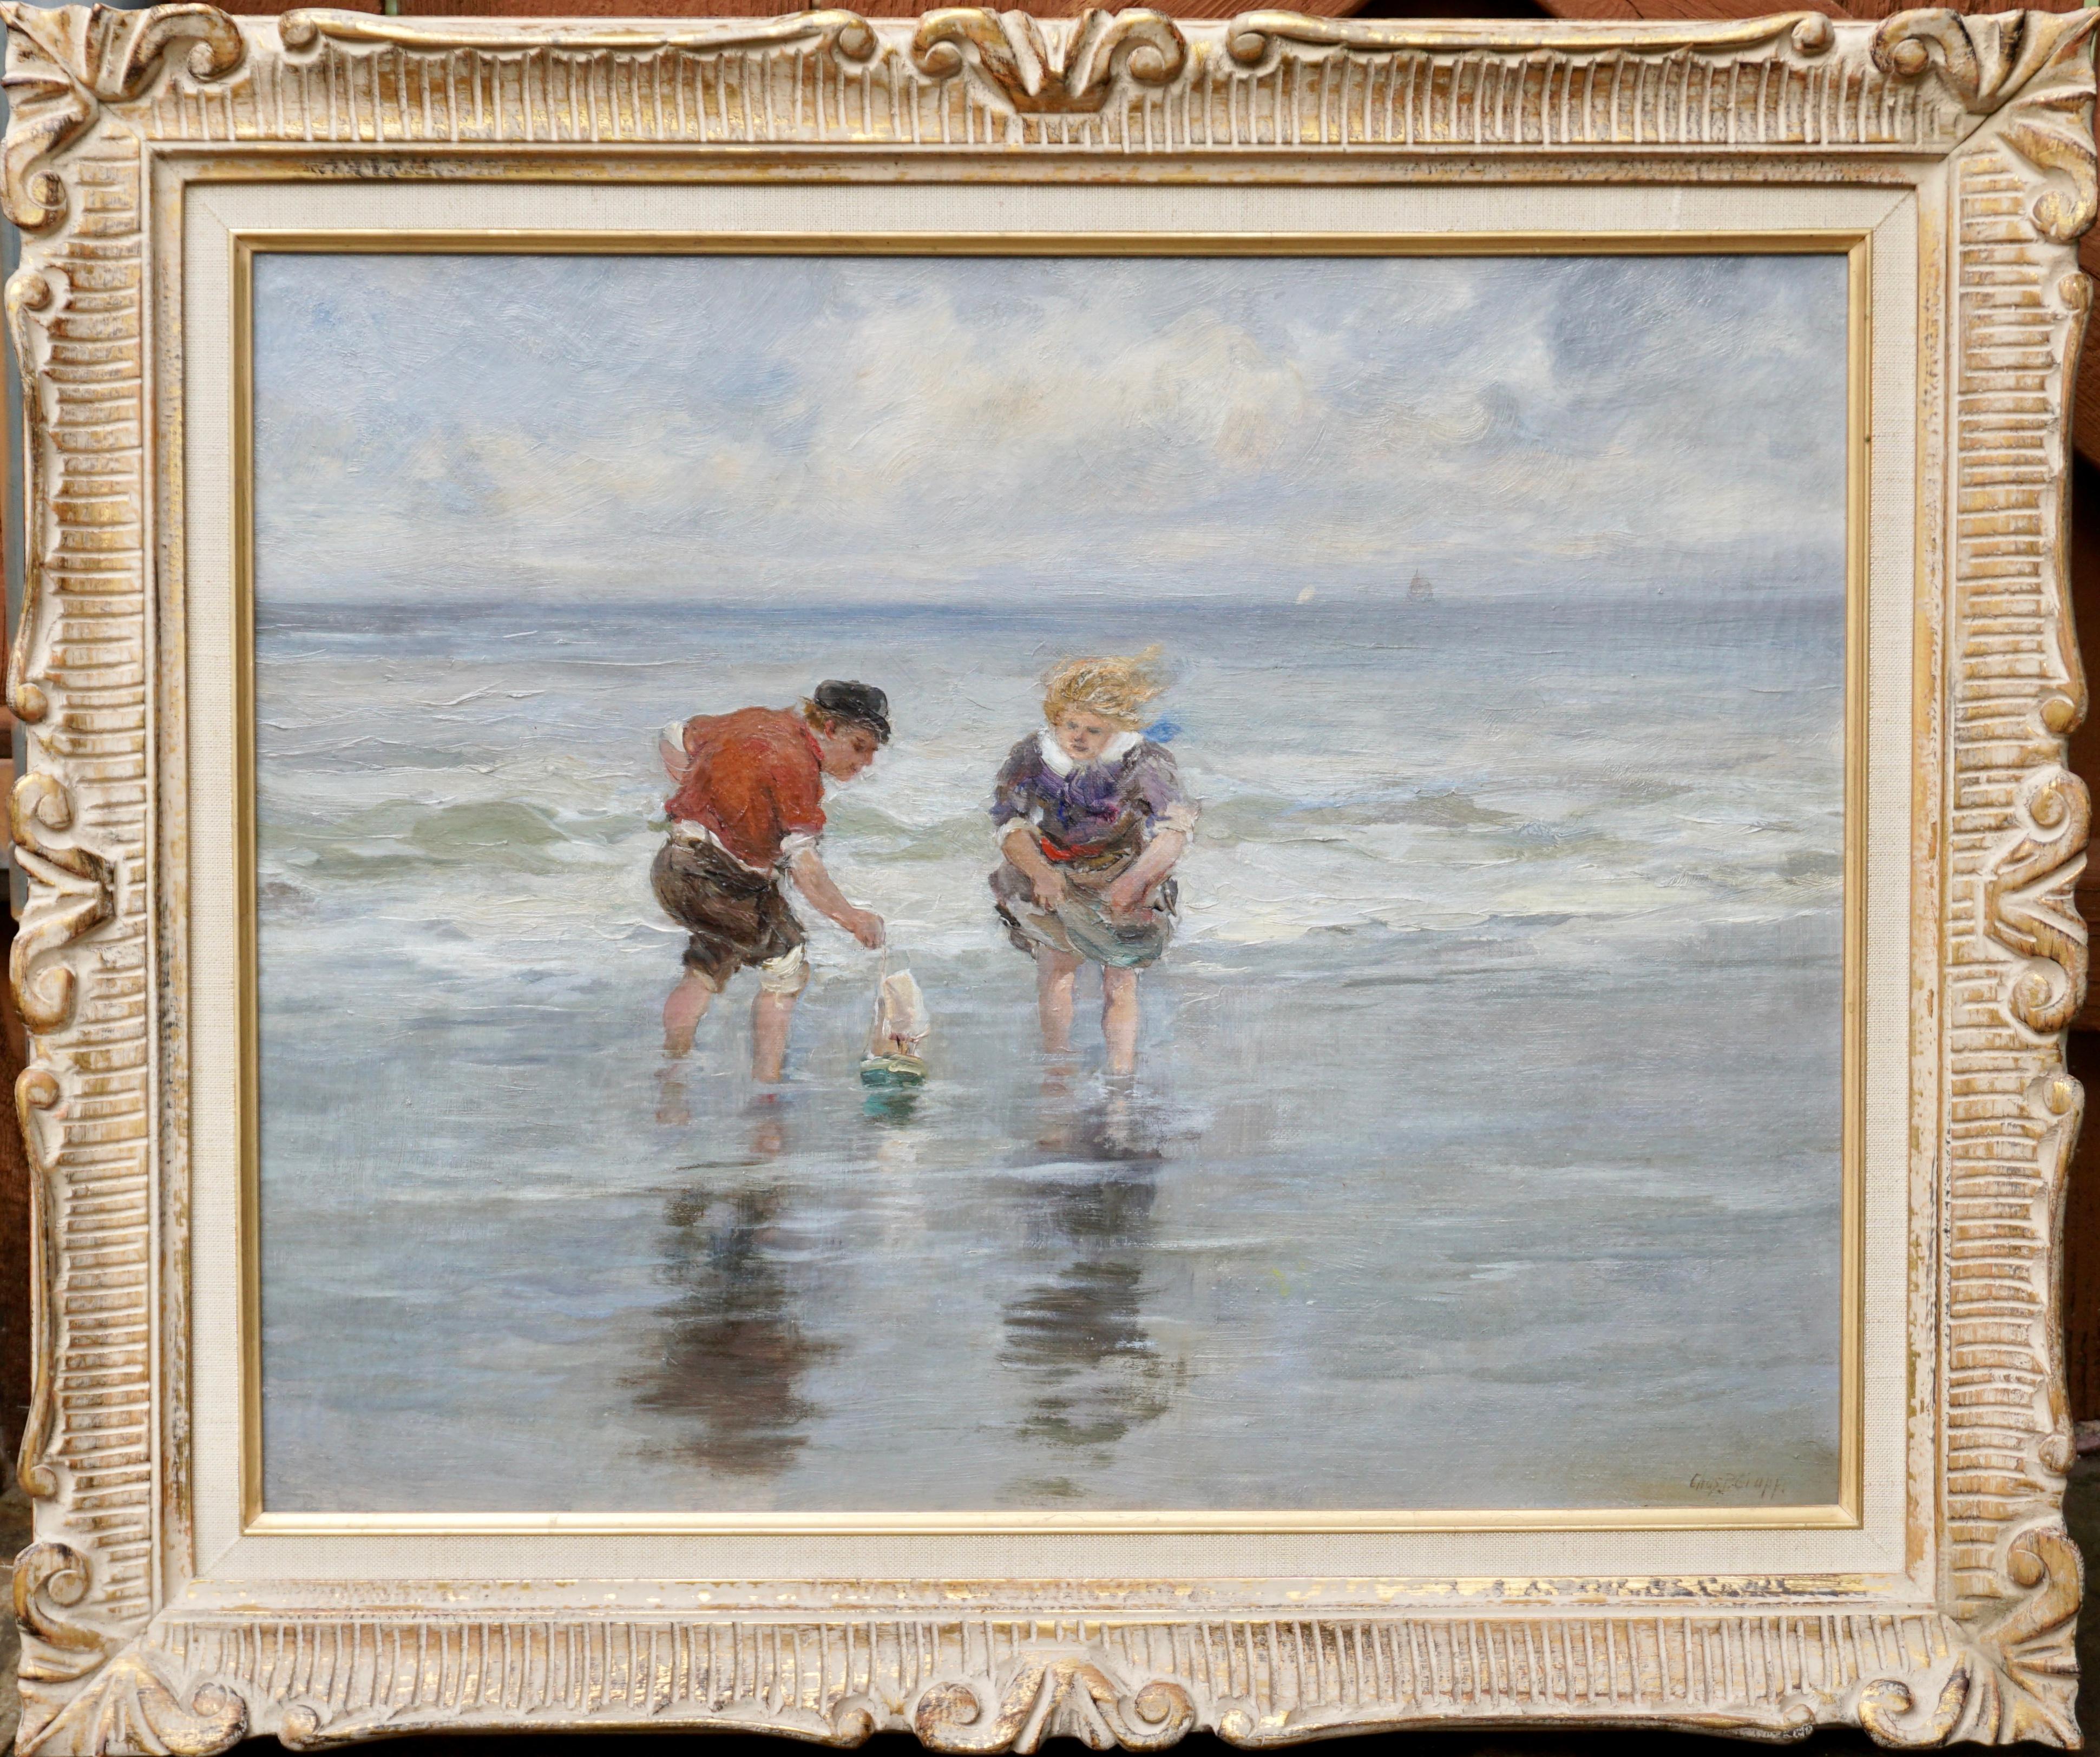 Hand-Painted Charles Paul Gruppe, Children Playing With Sailboat In Waves